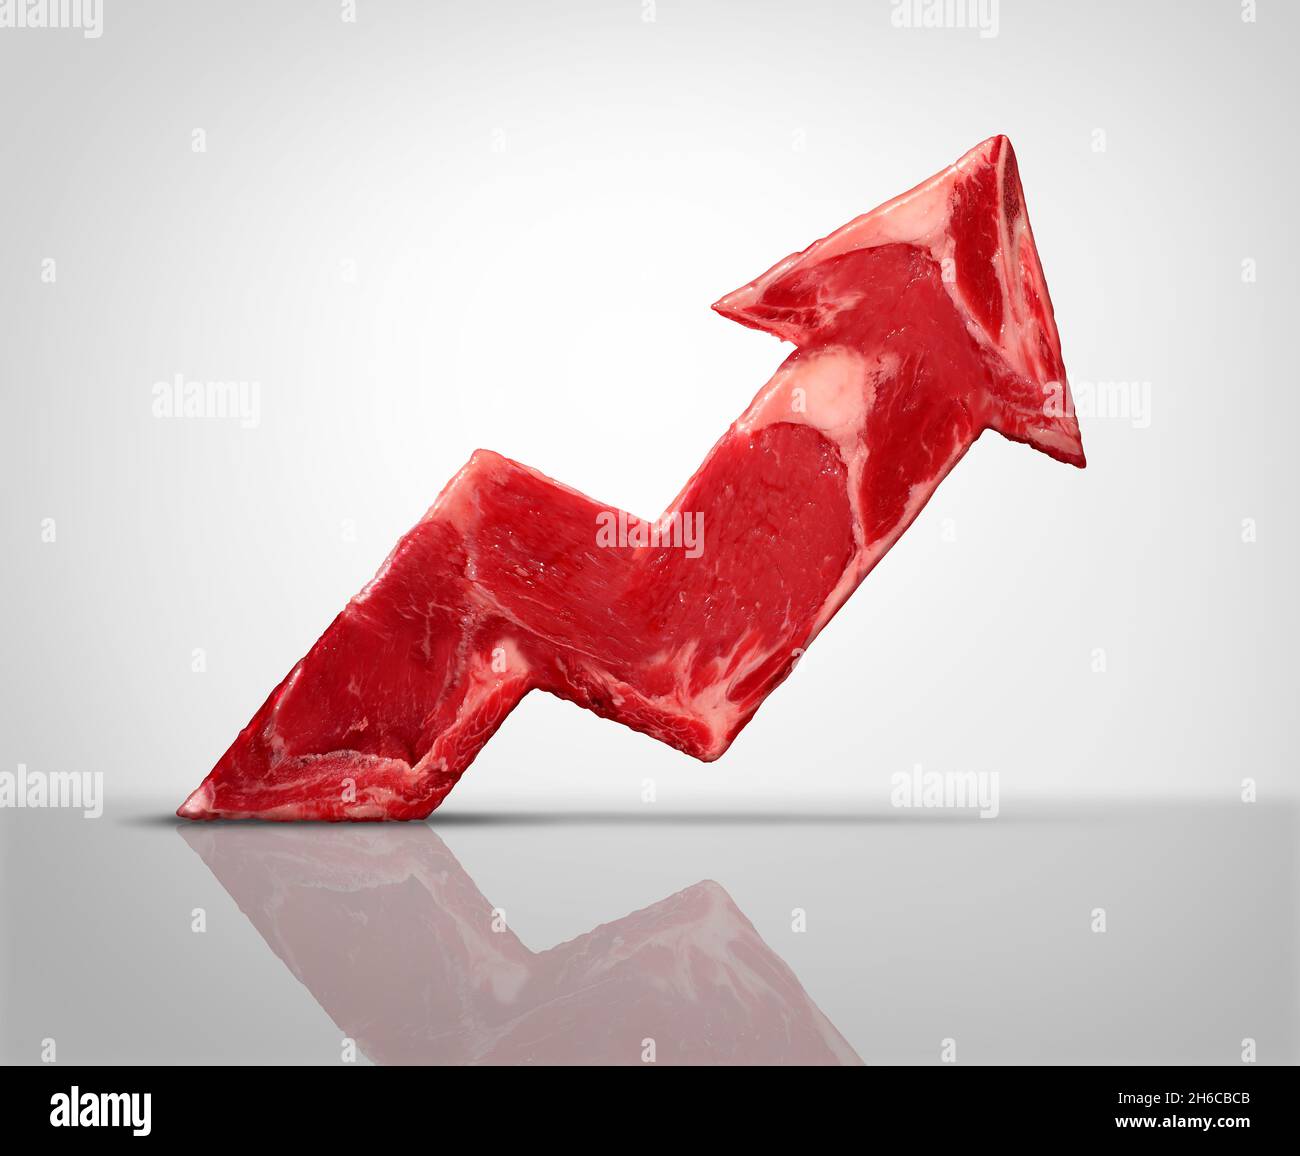 Rising meat prices and food price inflation or global beef industry surging in expensive cost as a raw red rib steak shaped as an increasing arrow. Stock Photo